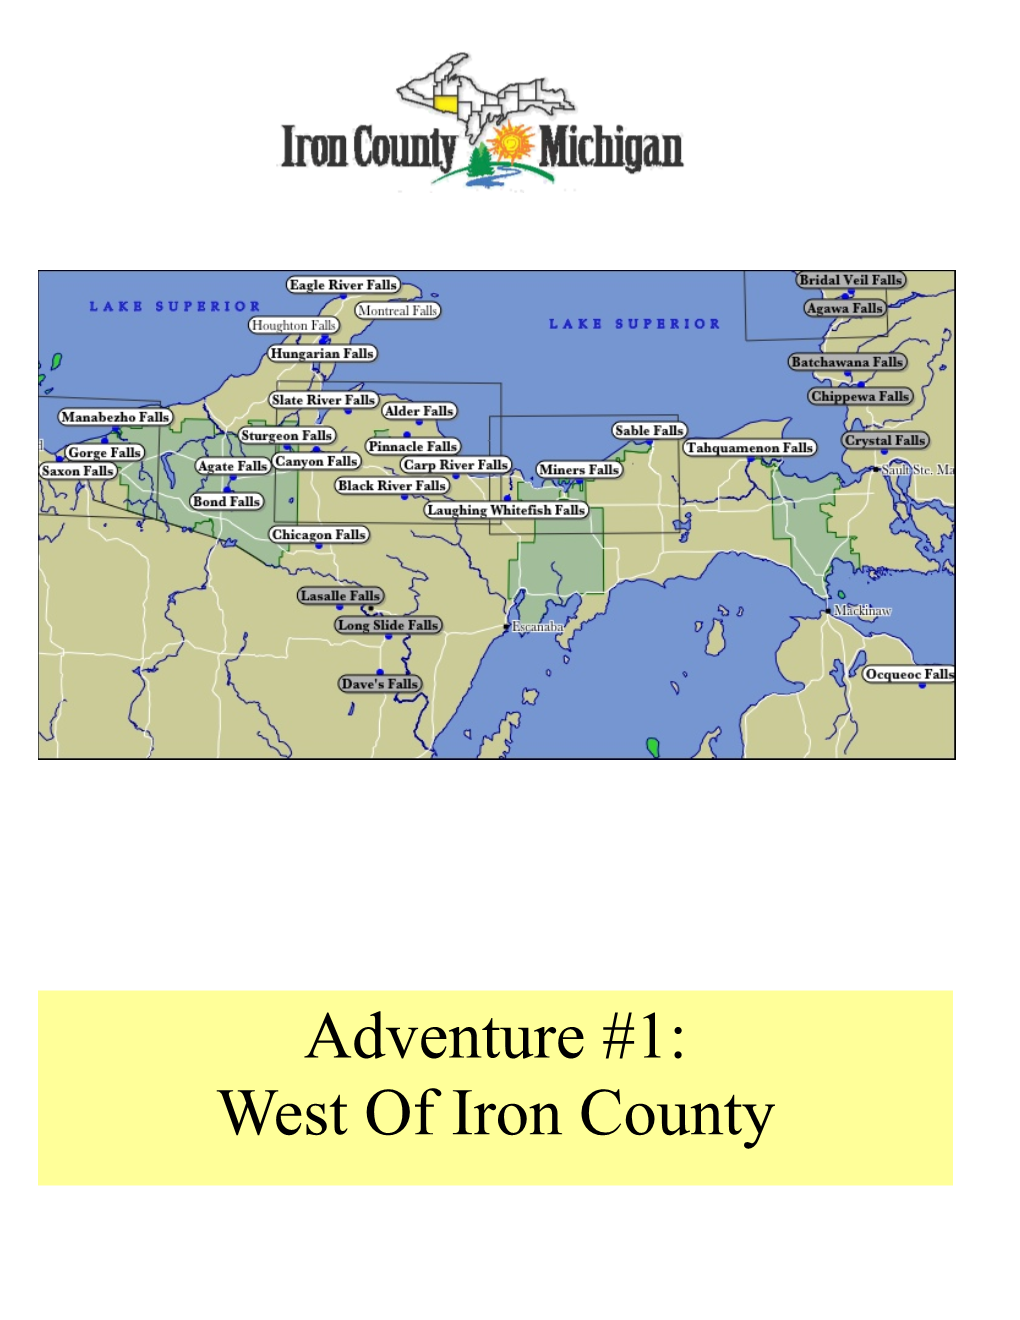 Adventure #1: West of Iron County Ottawa Visitor Center: Adventure #1: West of Iron County